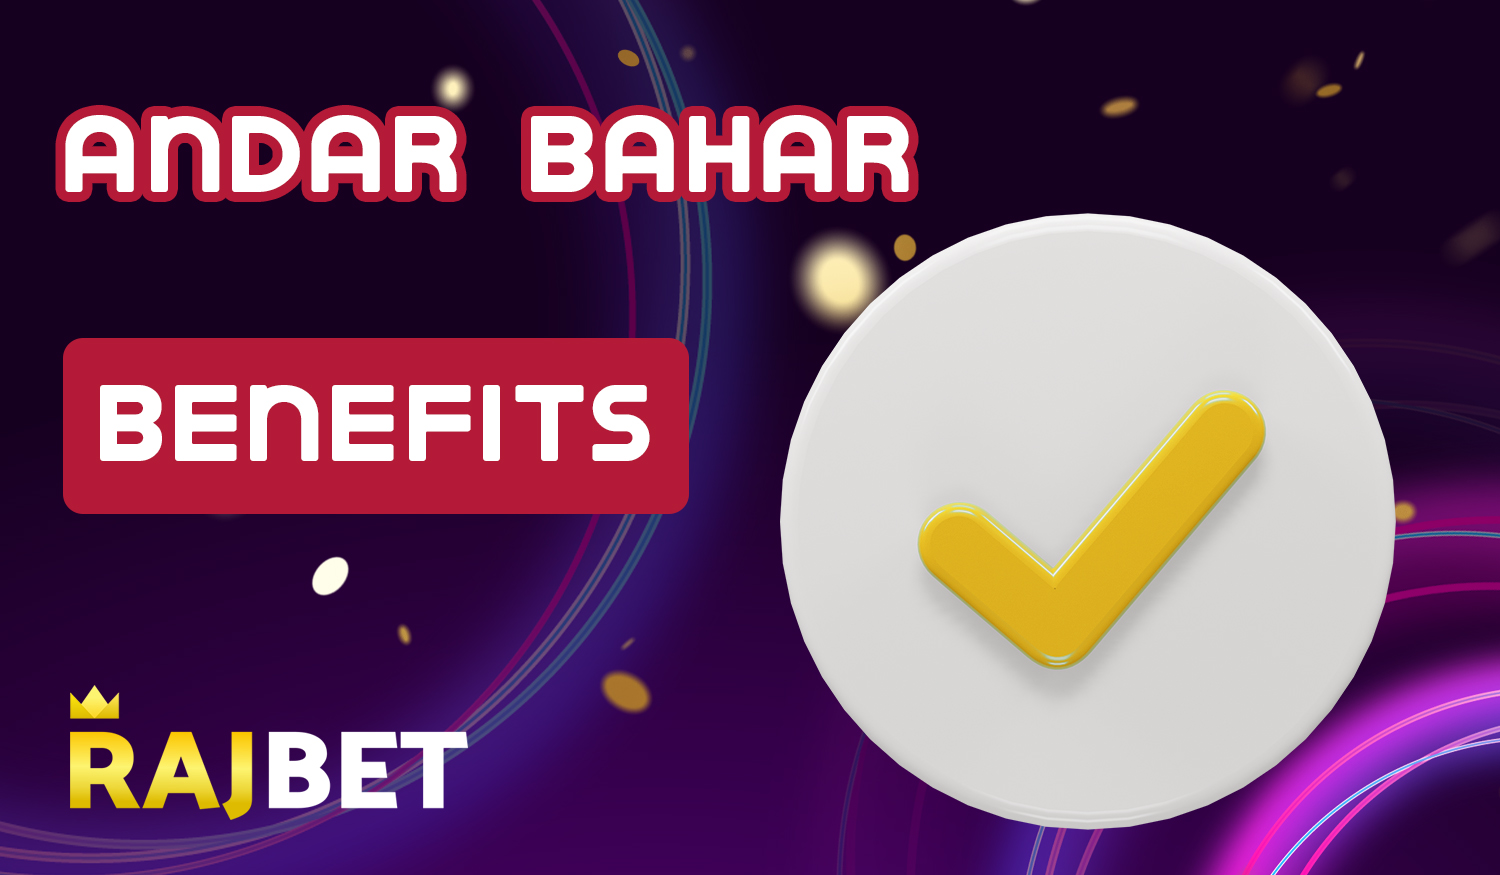 The main perimunities of Rajbet online casino for fans of the game andar bahar